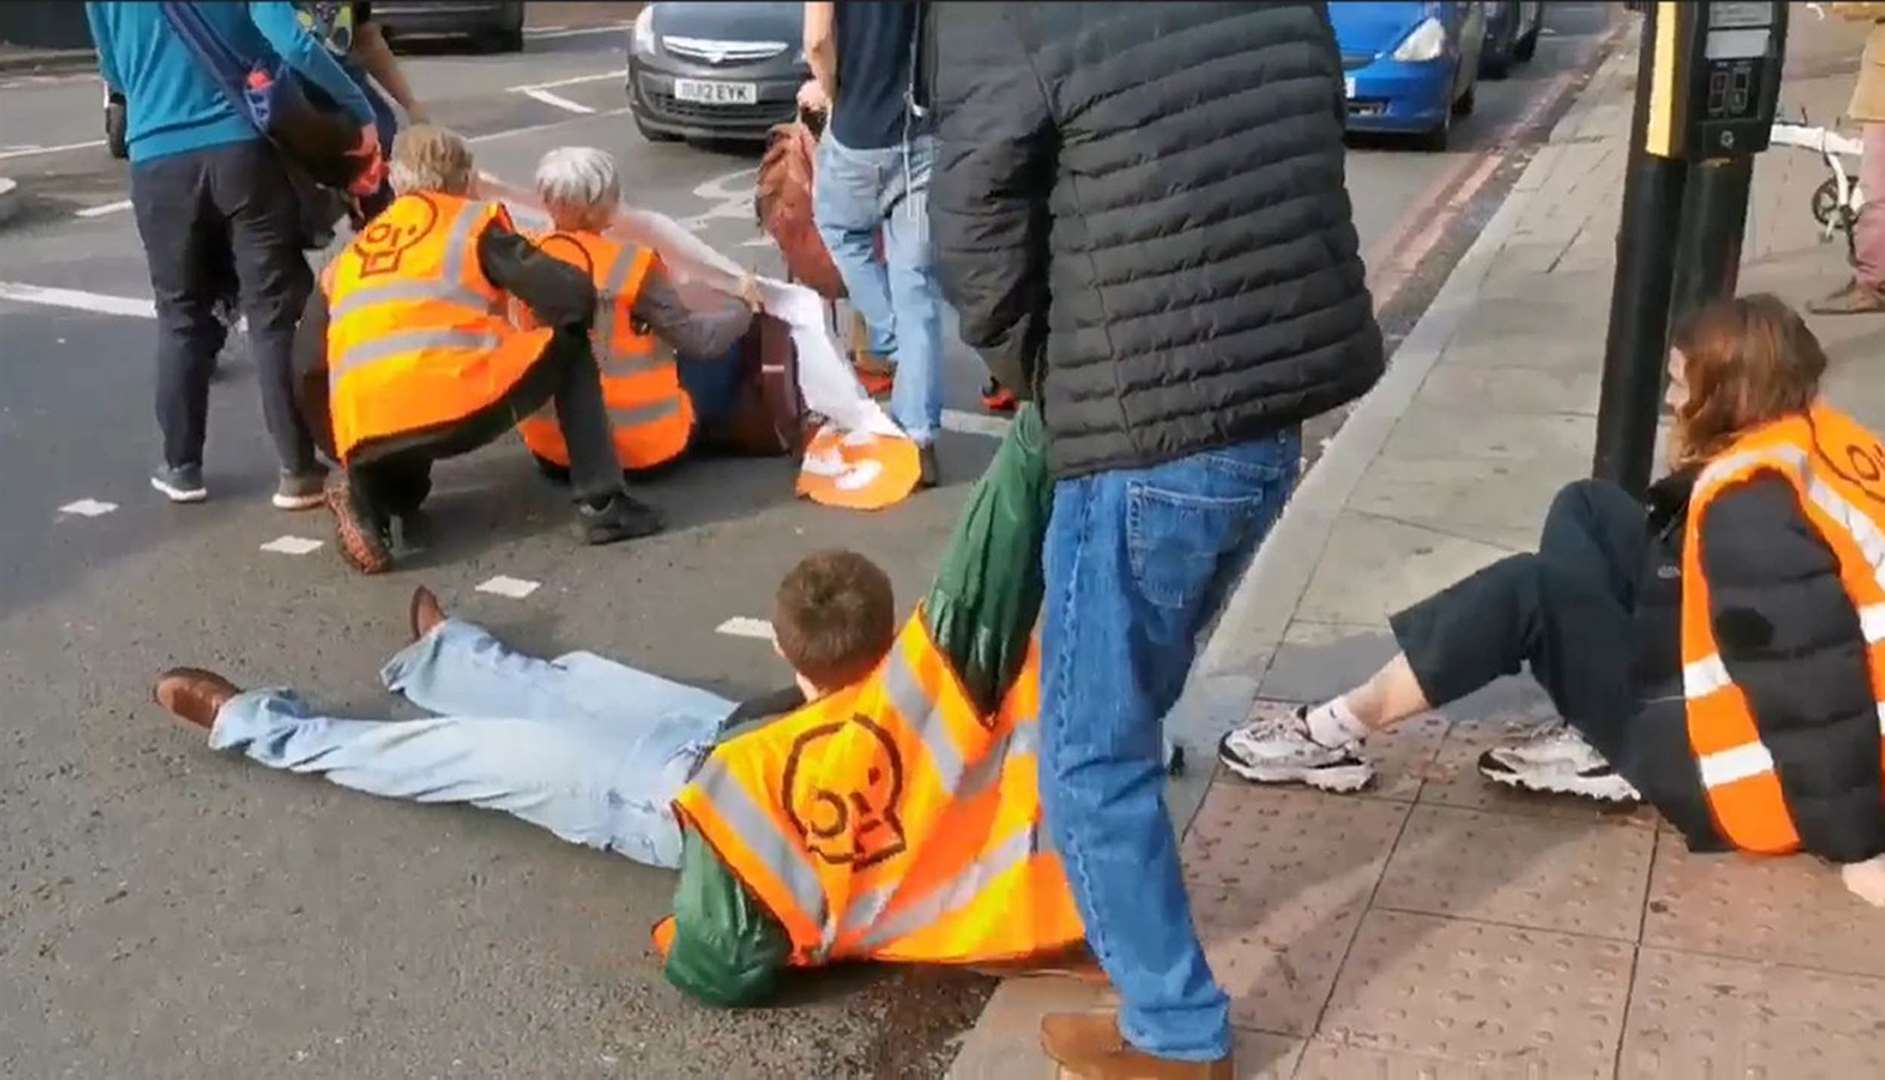 A member of the public dragging an activist off the street in October (Just Stop Oil/PA)